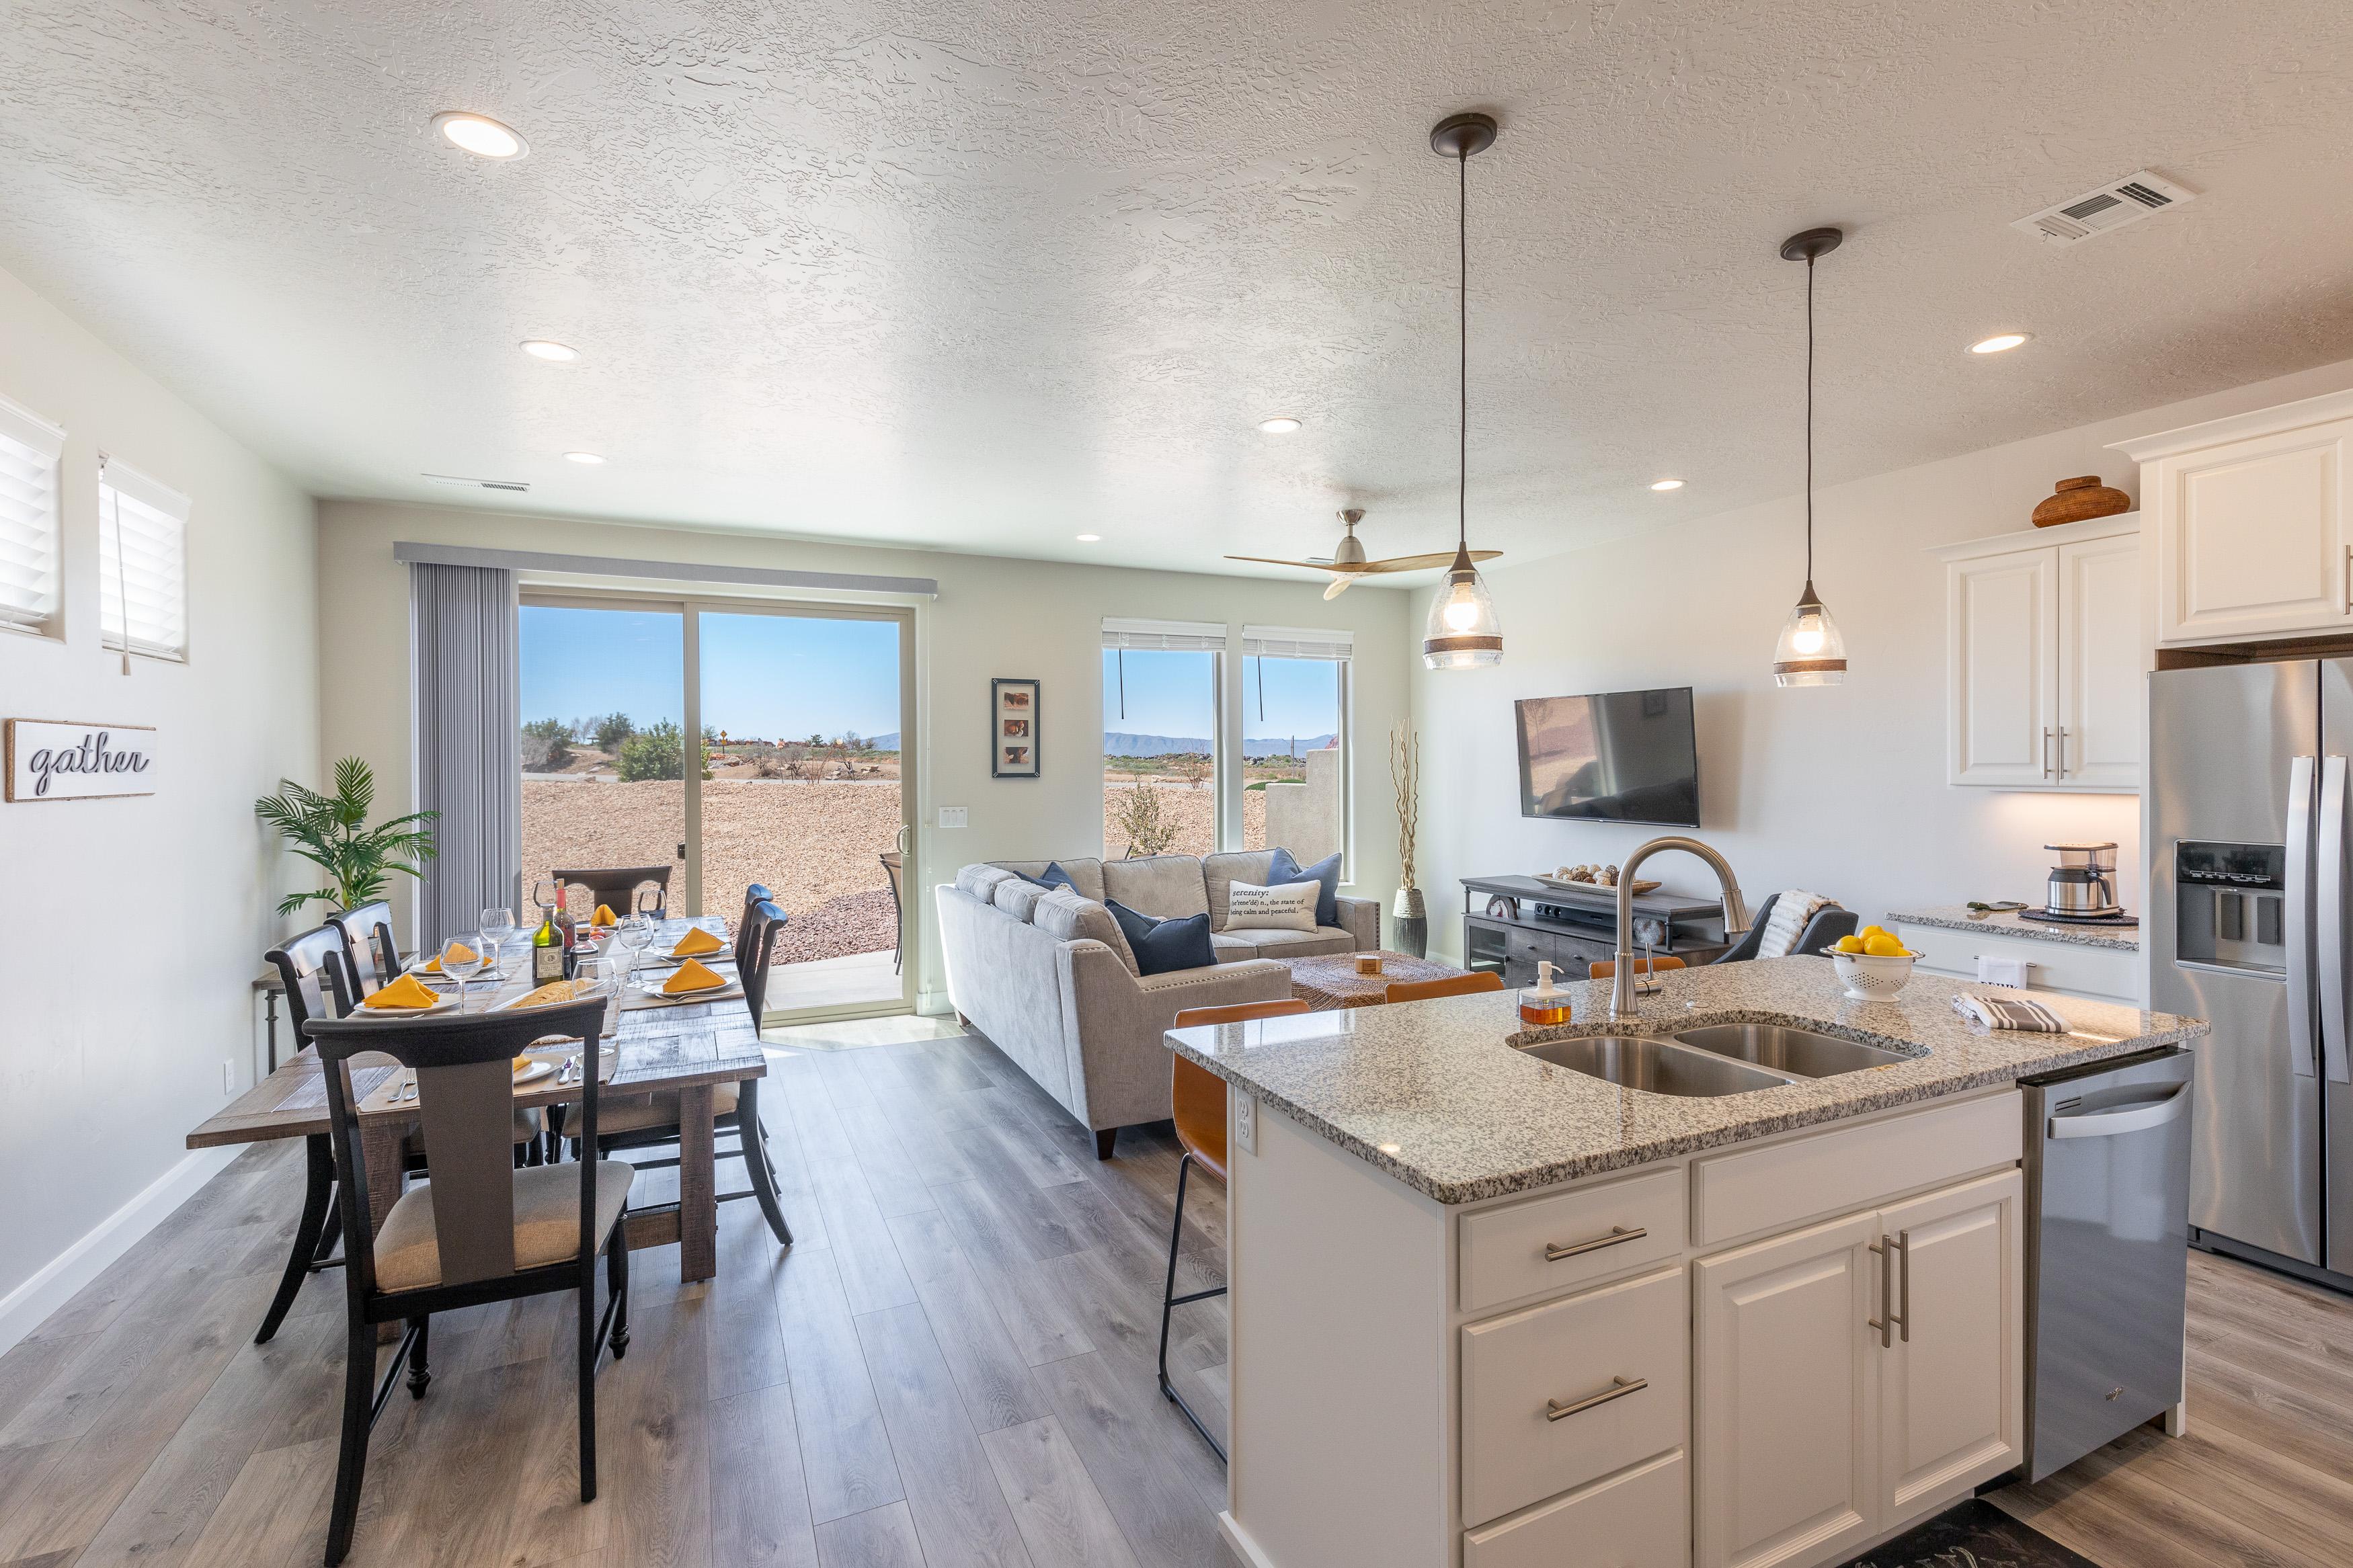 The living room is conveniently adjacent to the kitchen. There is also access to the back patio which has a BBQ grille suitable for all your favorite BBQ dishes.